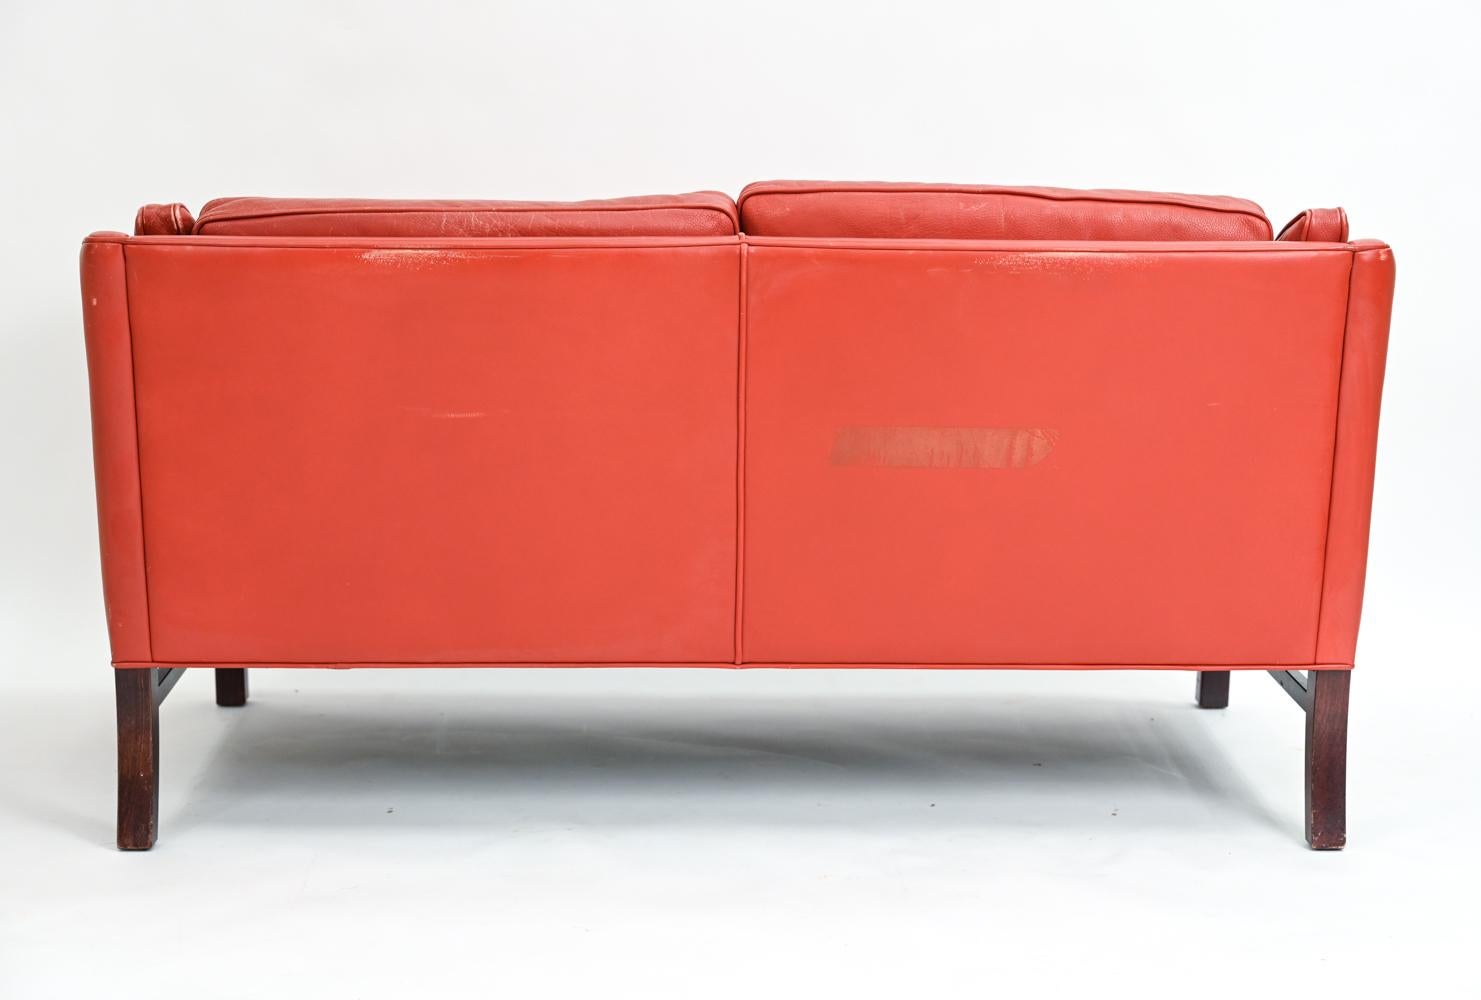 Danish Modern Leather Sofa Suite by Grant Mobelfabrik, c. 1970's For Sale 7